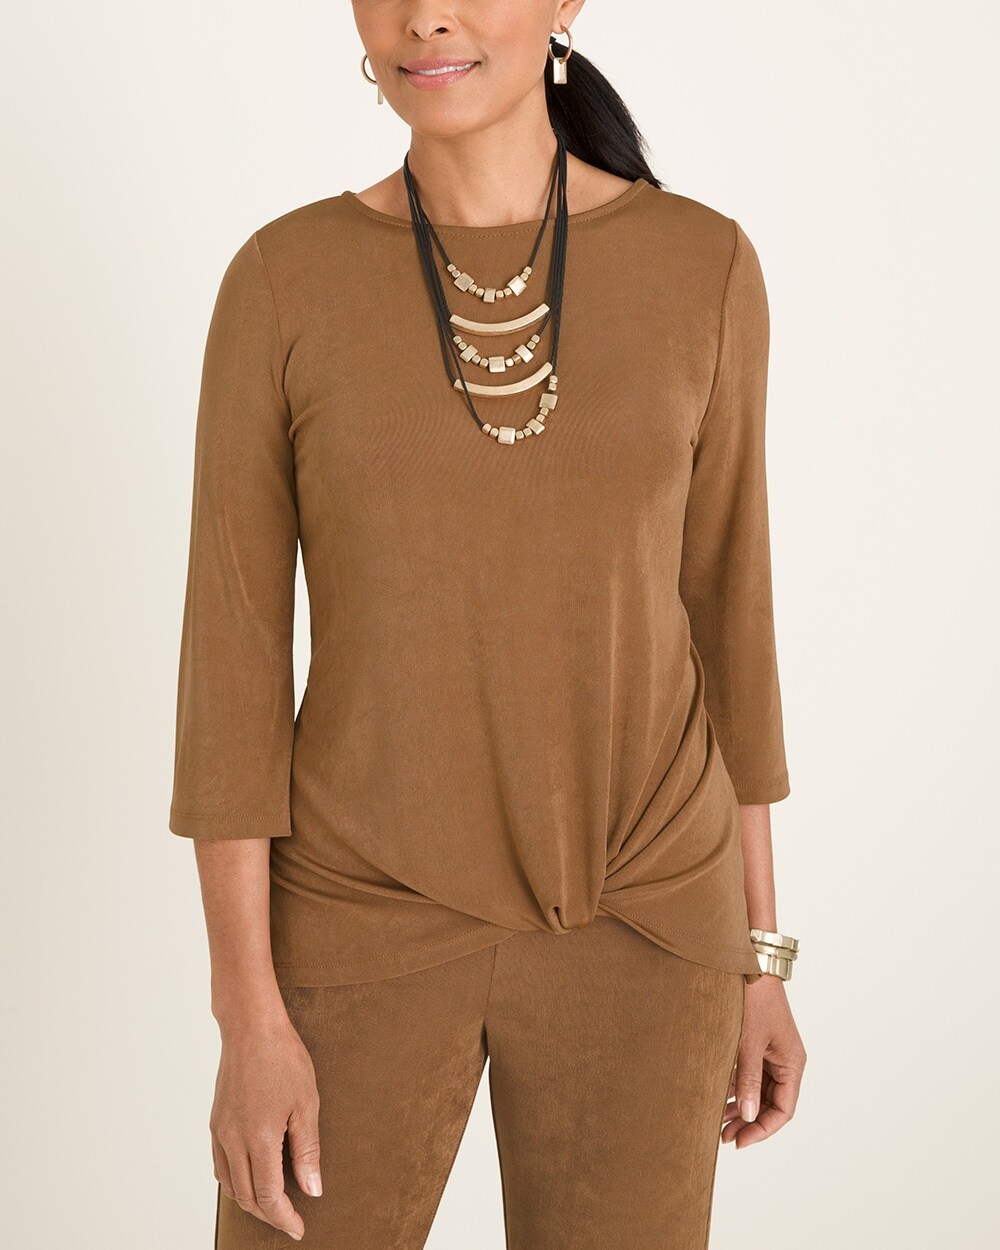 Travelers Classic Front-Tuck Top